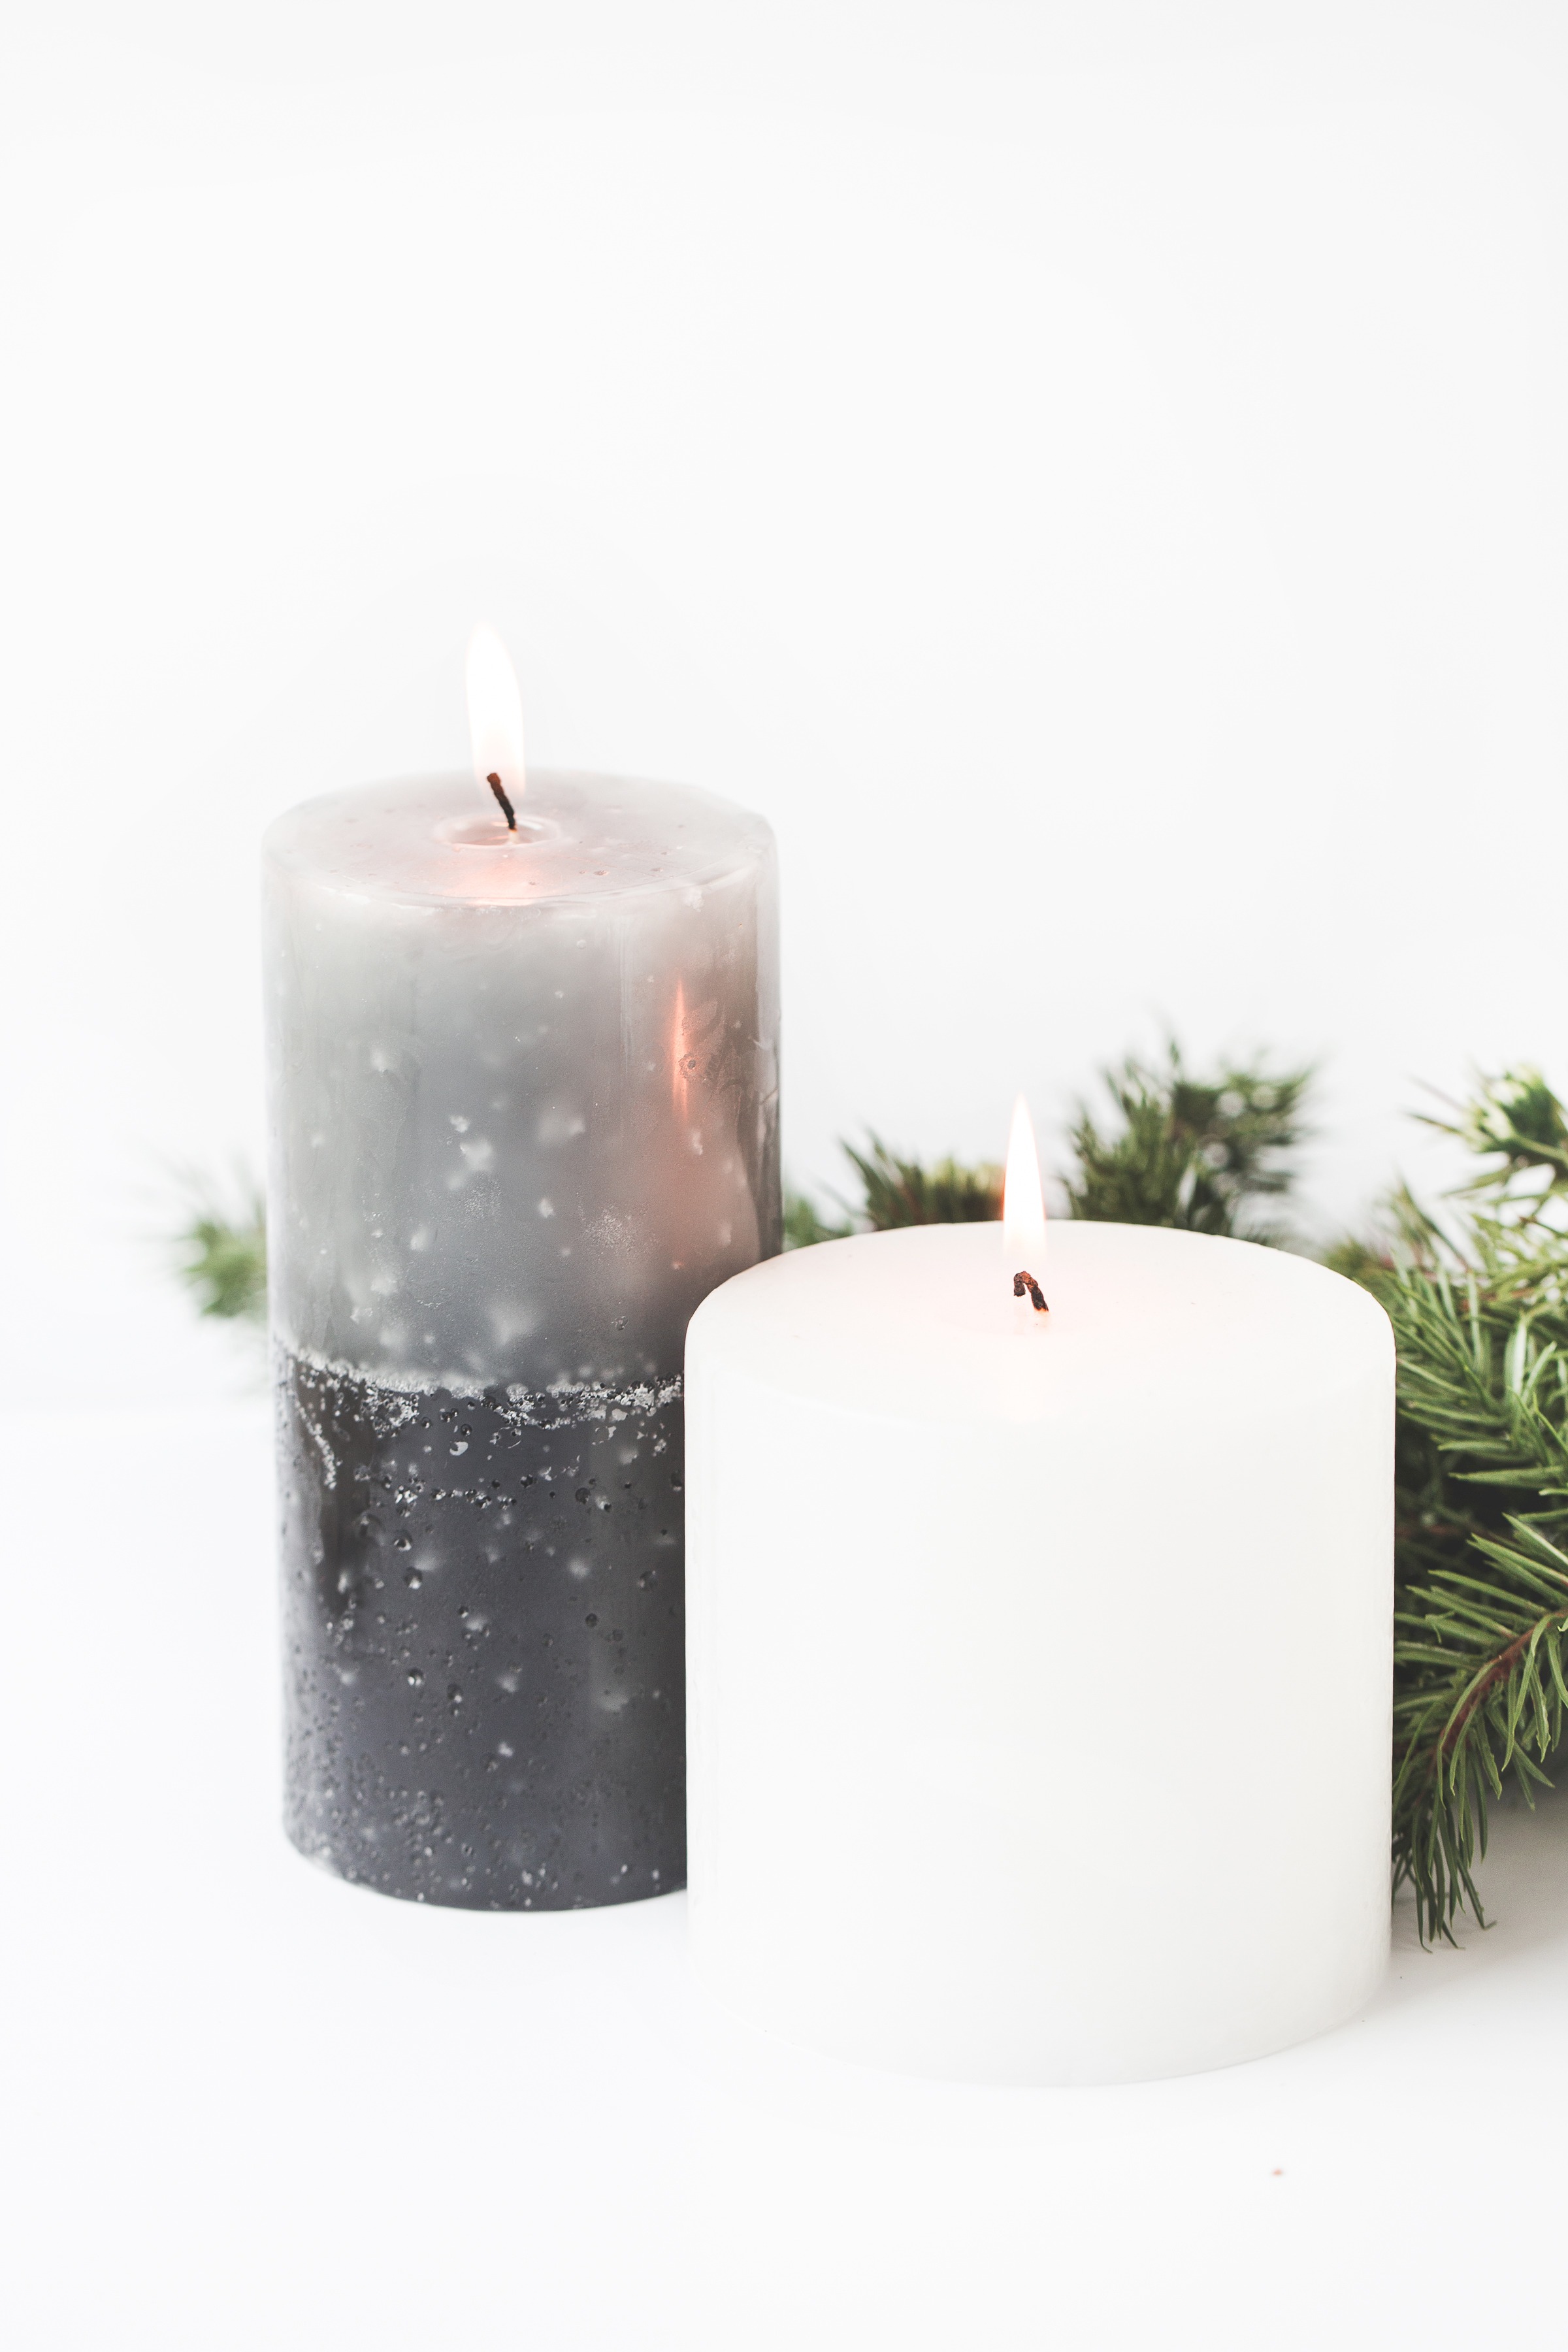 The Best Candles to Make Your House More Festive 23